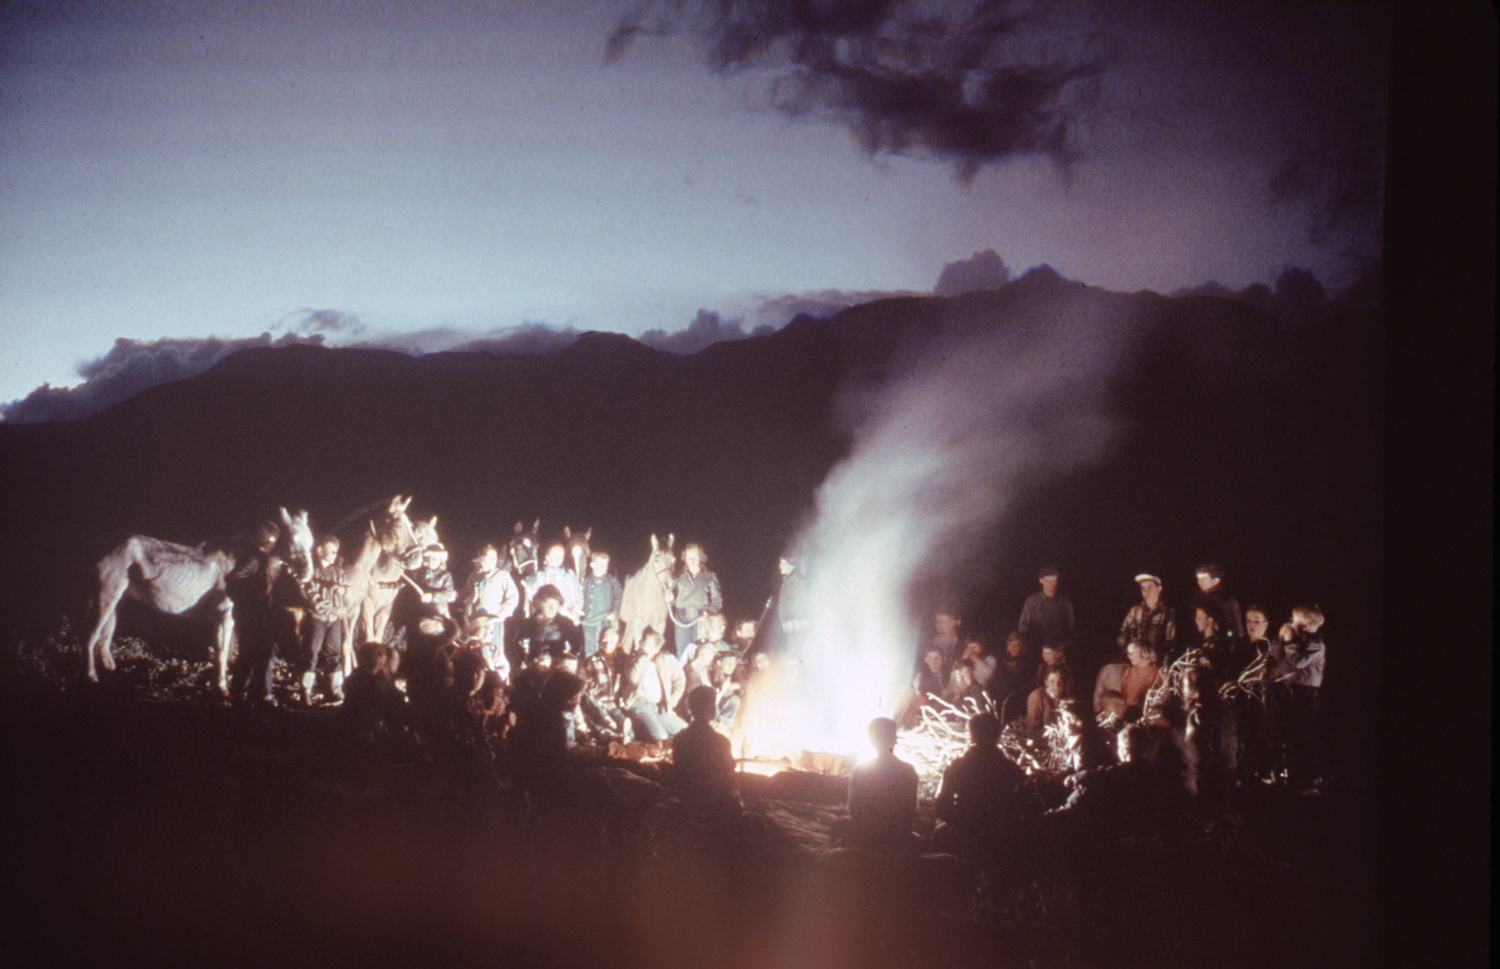 Safe in camp, boys and girls gather around a fire to sing school songs. Their geology trip has time for fishing and playing Commando among big rocks.